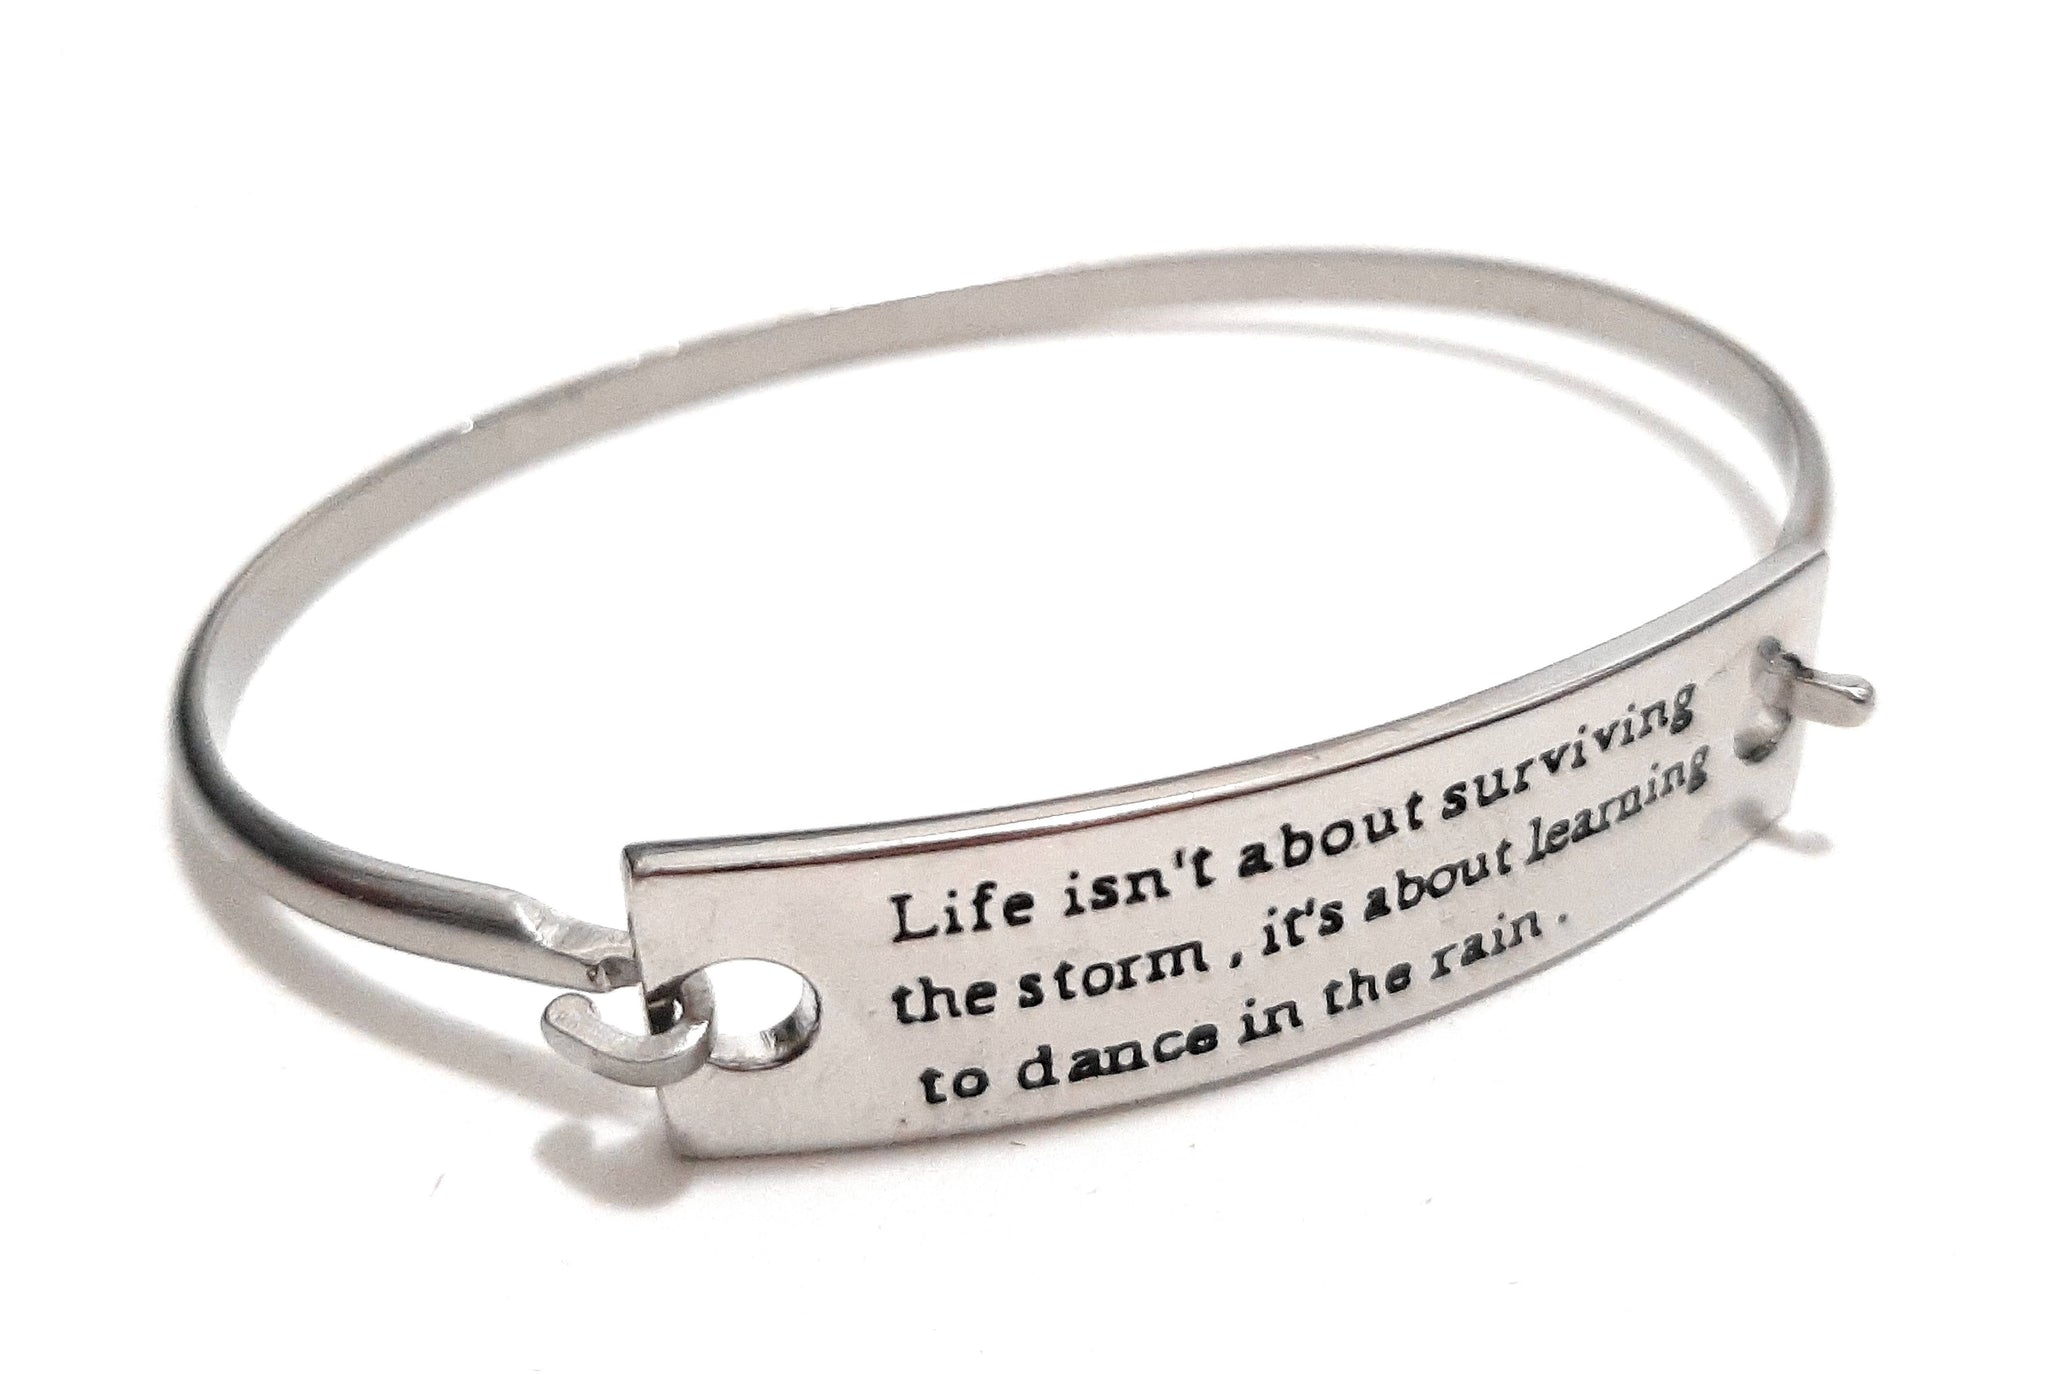 Stainless Steel Inspirational Message Connector Bangle Bracelet - Life isn't about surviving the storm...